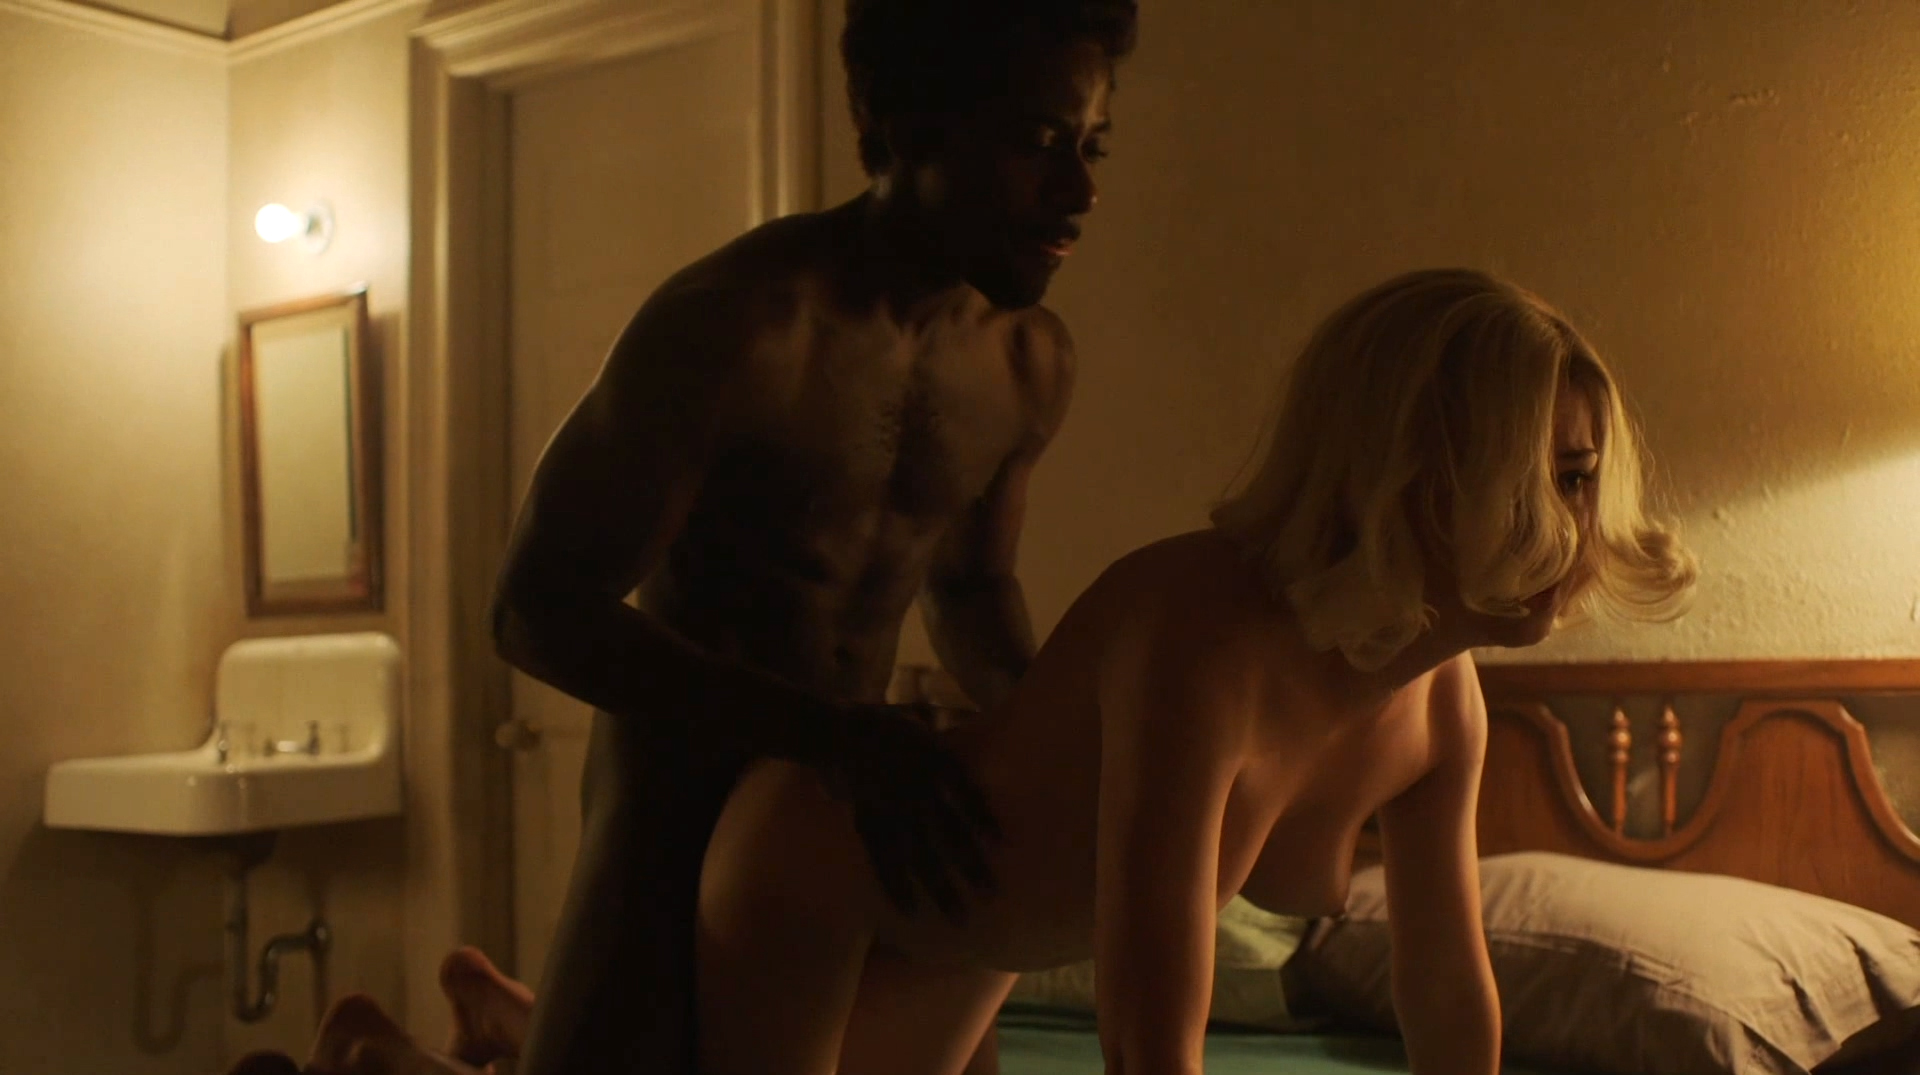 nude, sex, sex scene, doggystyle sex, interracial sex, butt, tits in movies...